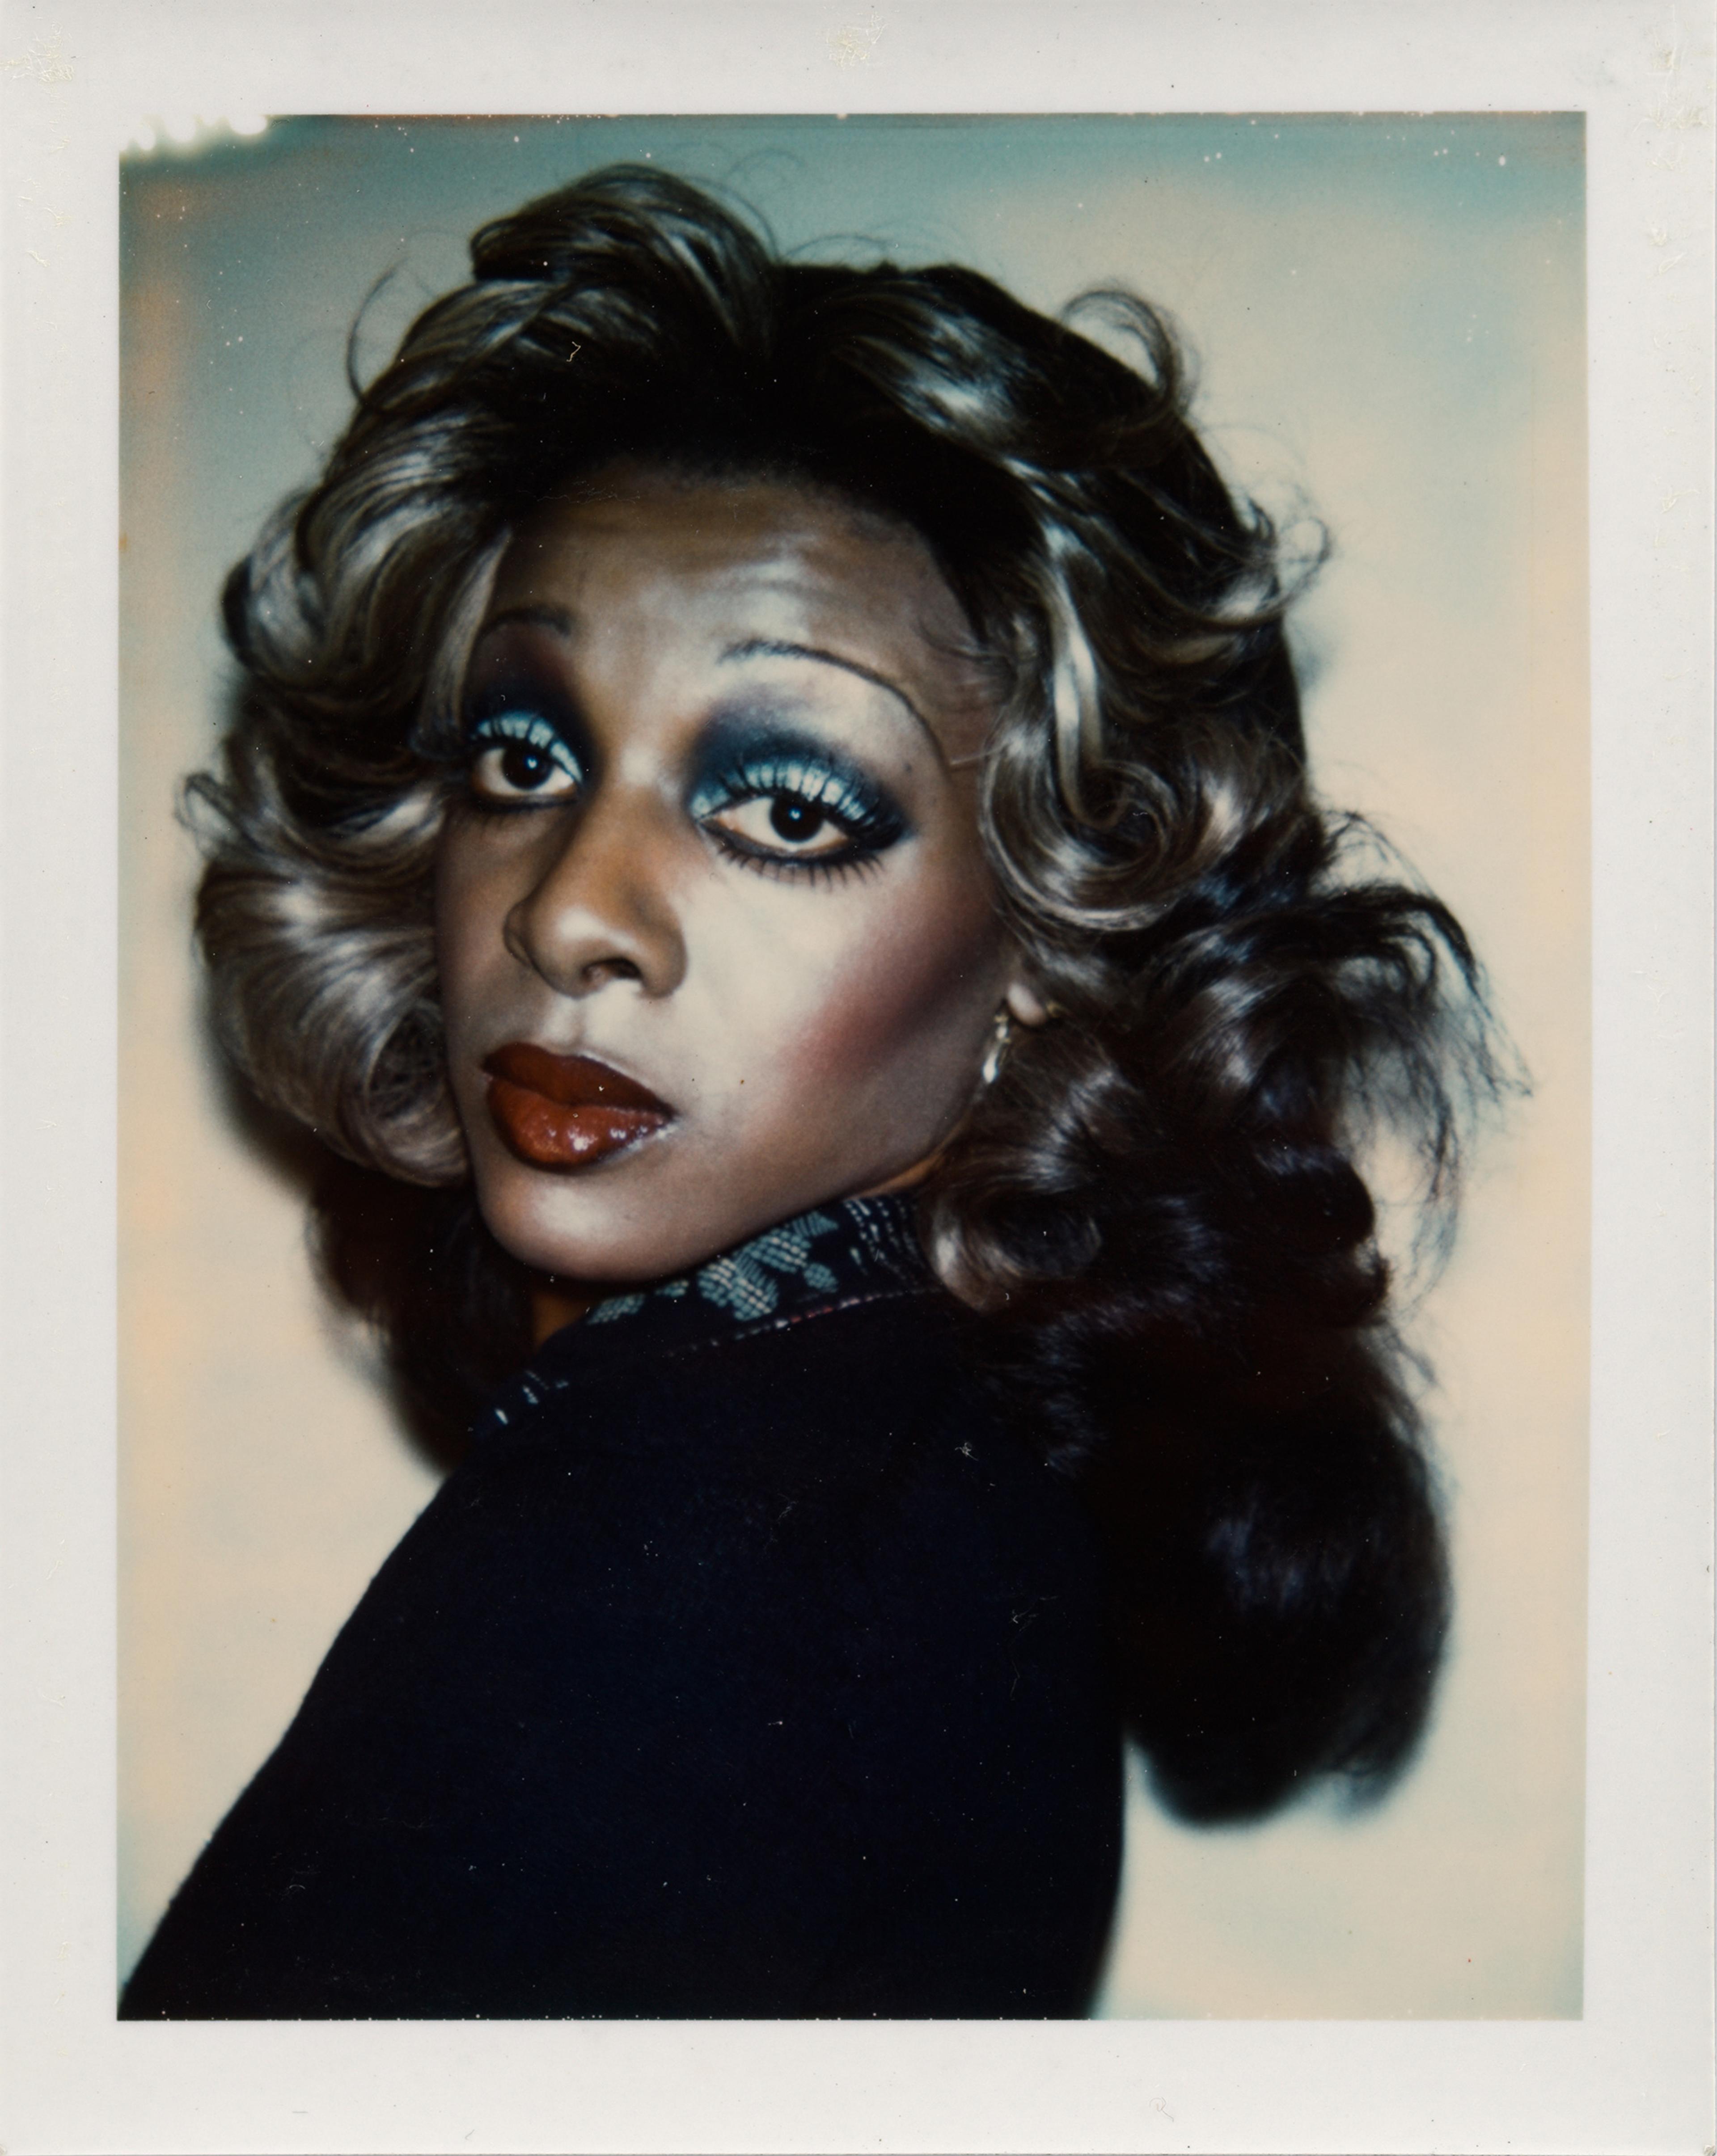 Polaroid of a person with a lot of make-up.